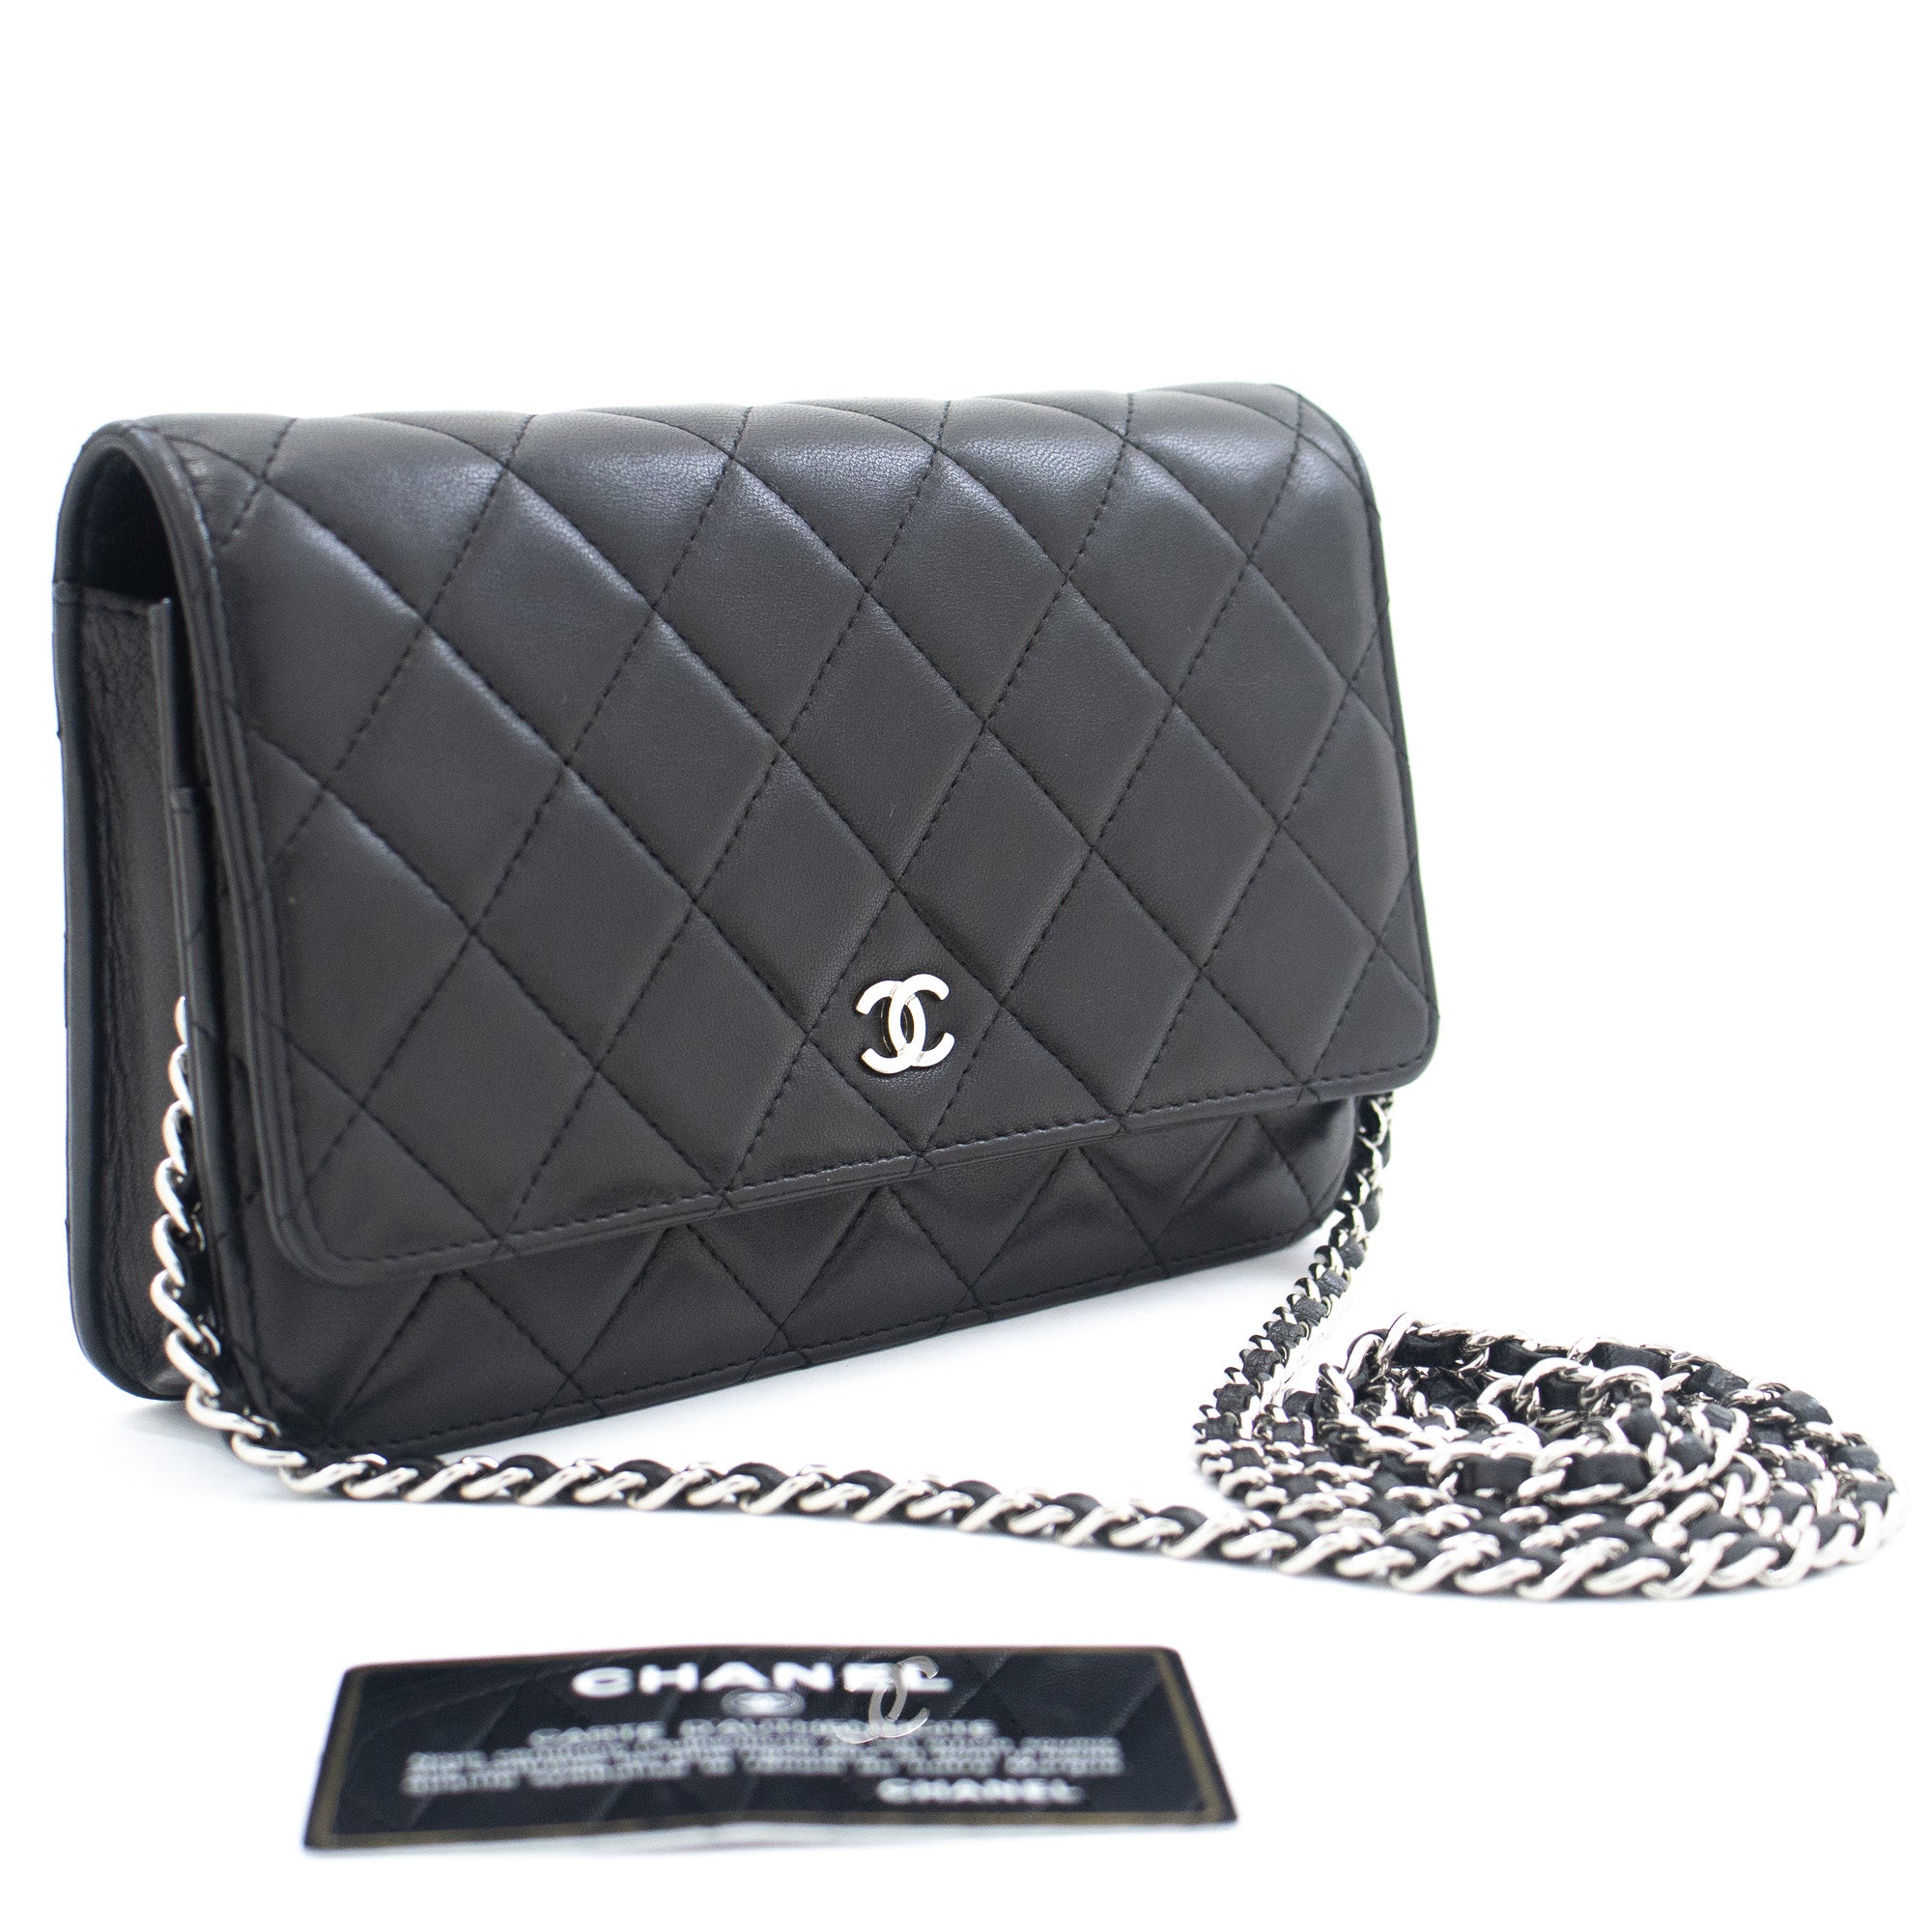 Chanel Quilted Wallet on Chain WOC Black Lambskin Silver Hardware – Coco  Approved Studio